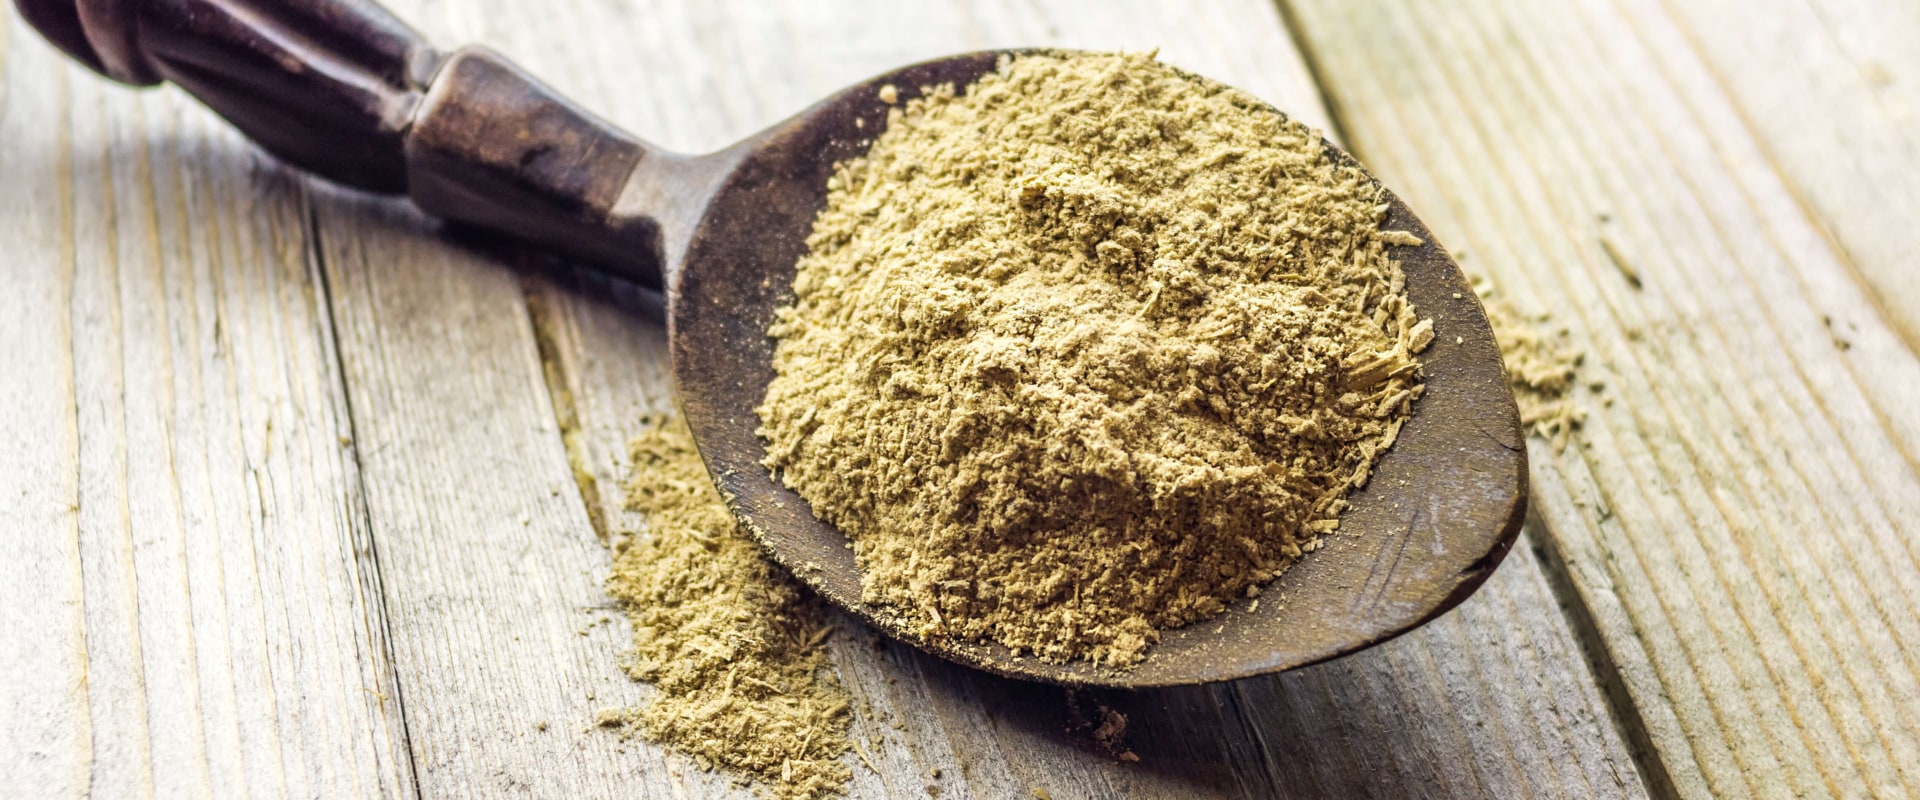 The Healing Power of Hawaiian Kava Root: Can it Treat Muscle Tension or Pain?